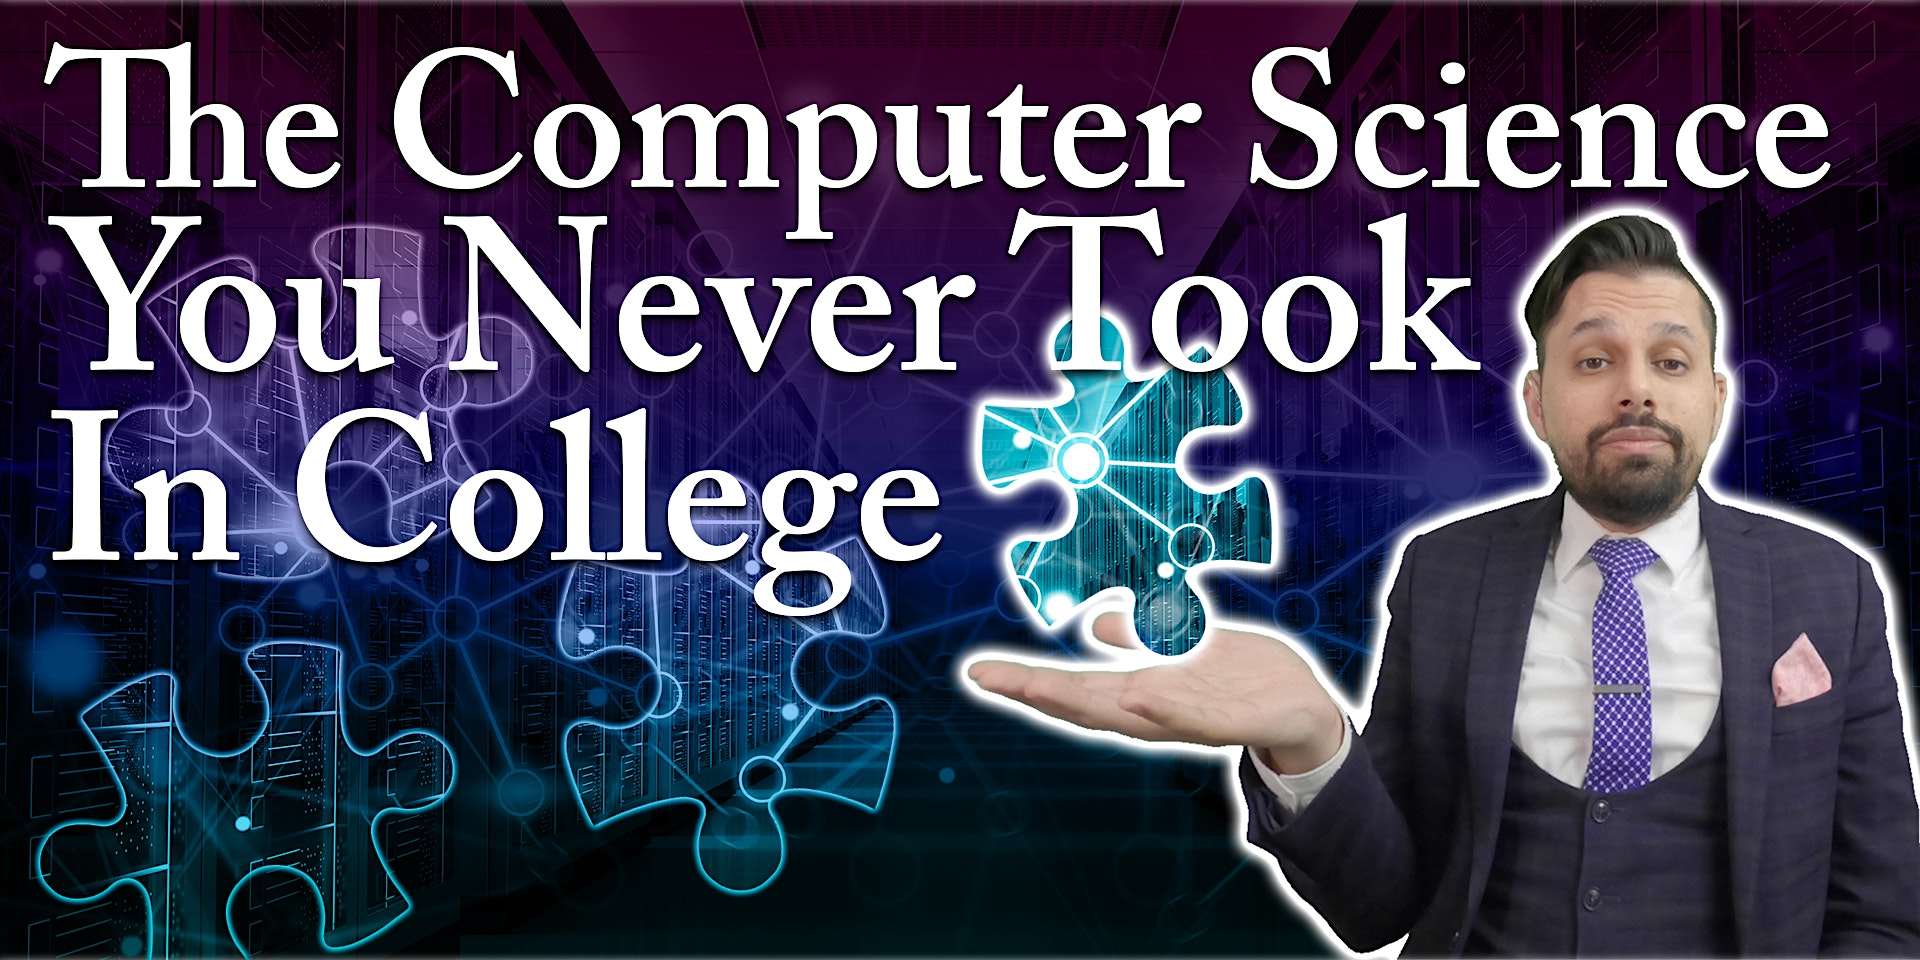 FRI, JUN 24, 2022 - Dynamic Programming: The Computer Science You Never Took in College ③